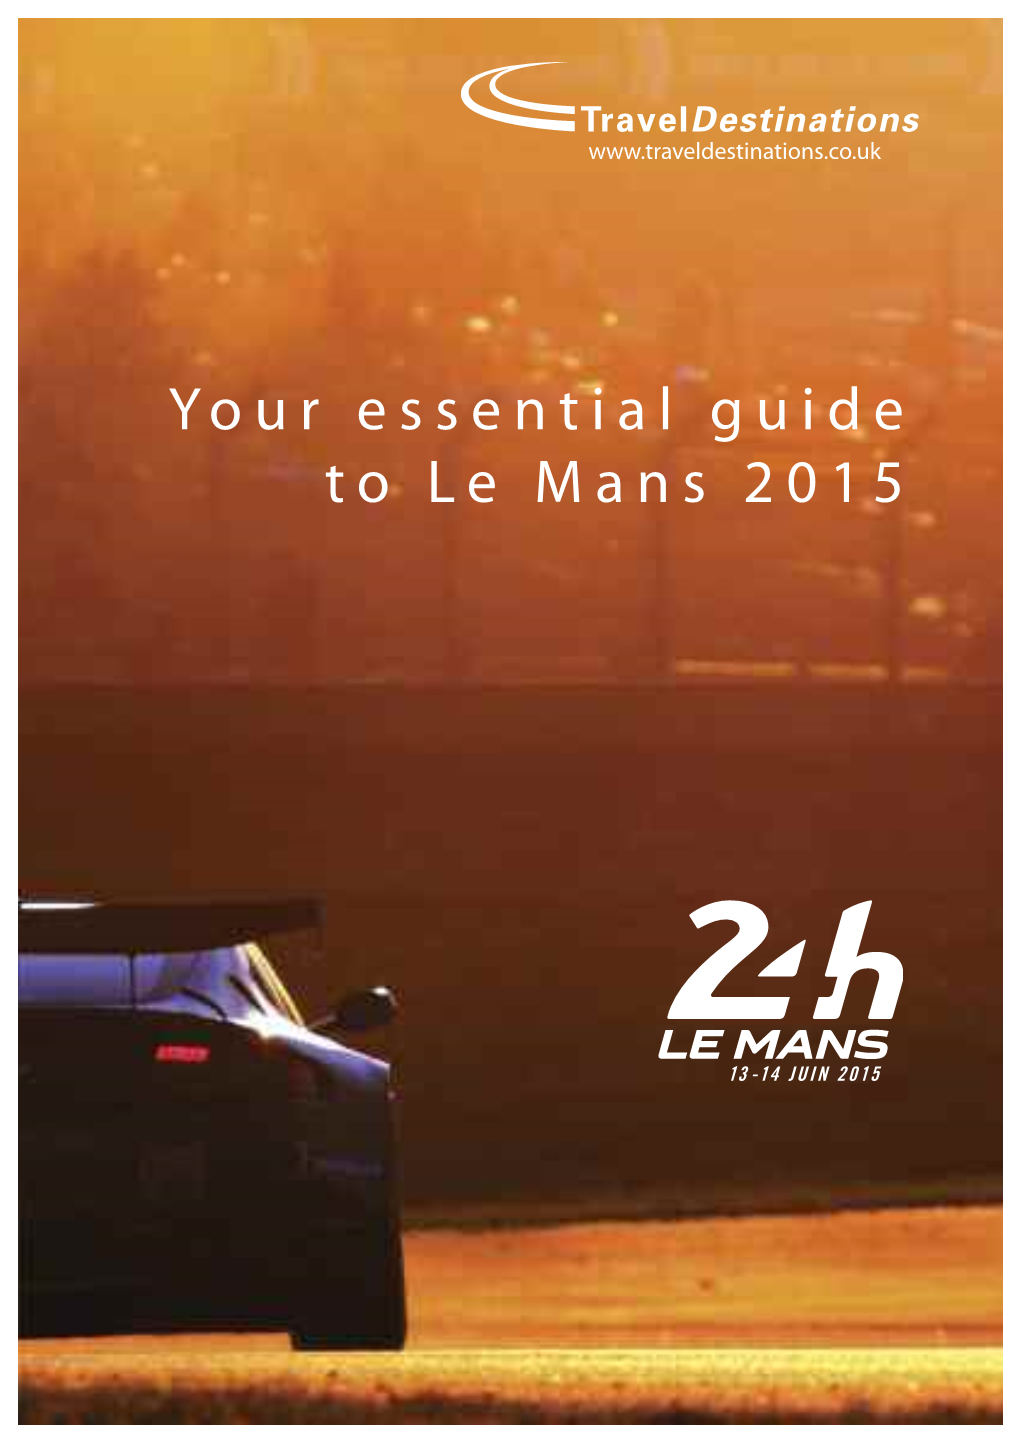 Your Essential Guide to Le Mans 2015 On-Circuit Assistance Helpline